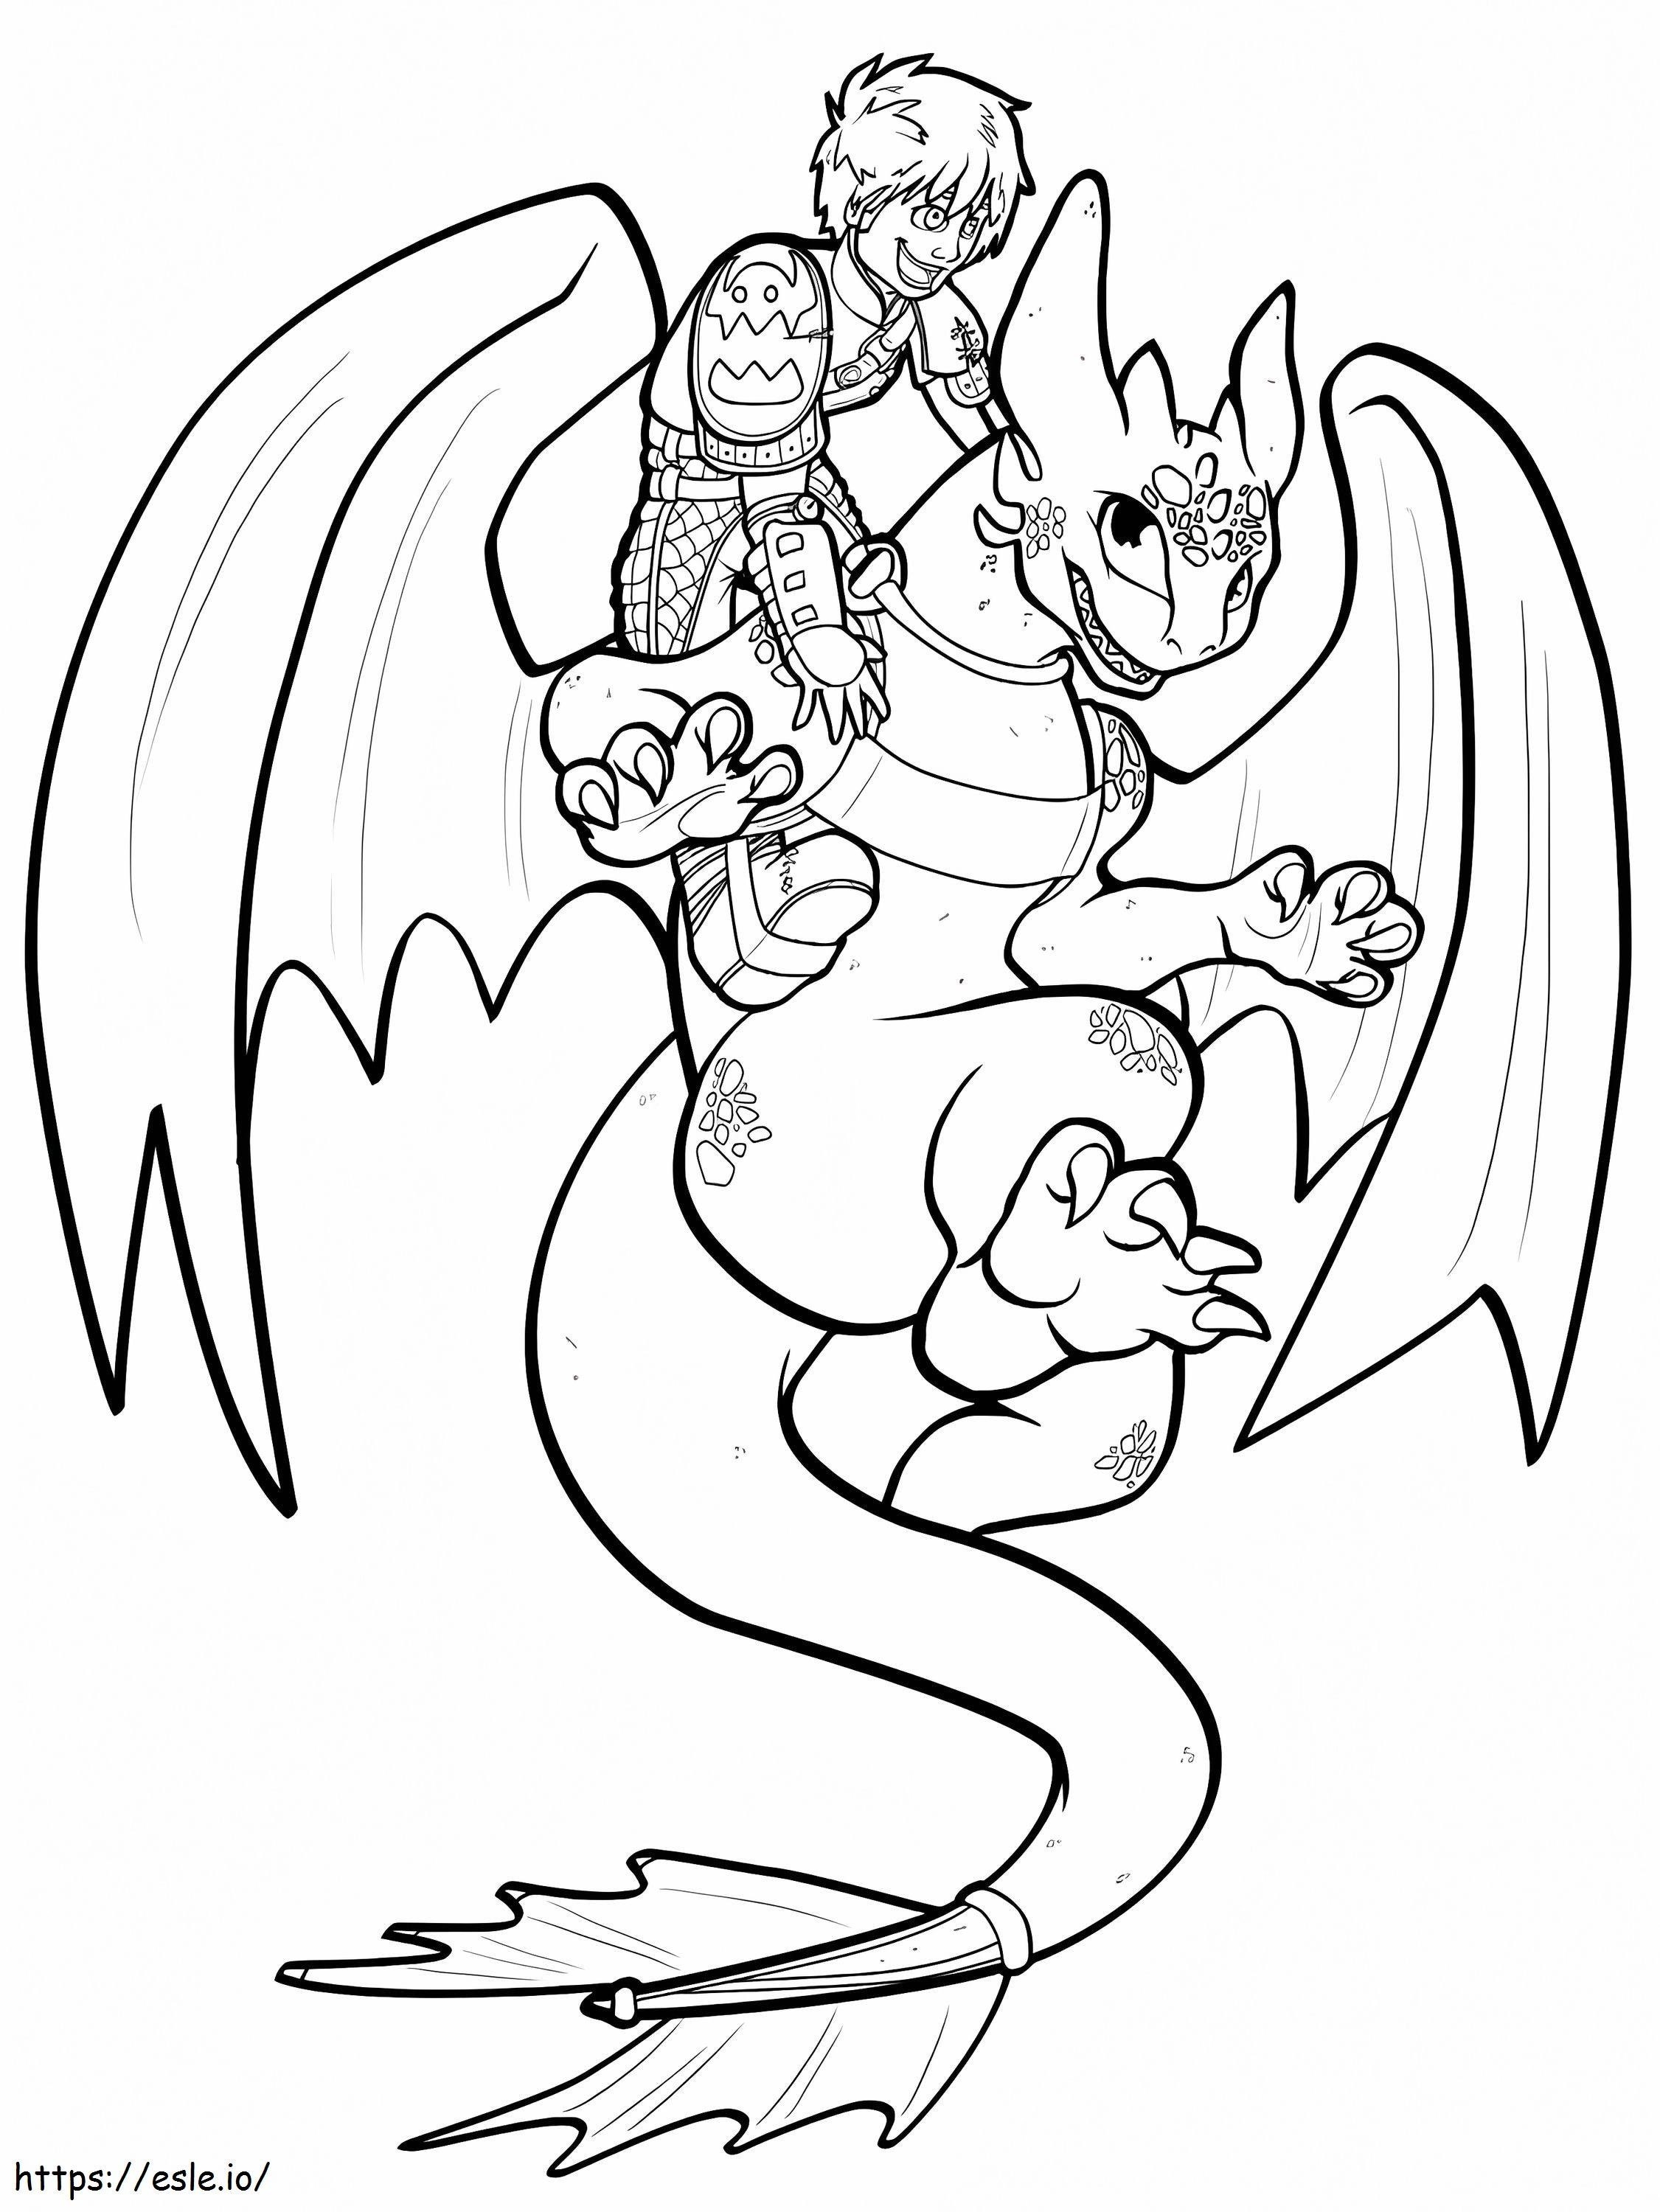 1585965657 Hiccup And Toothless Free Printable Adults How Toain Your Dragon Full Movie coloring page